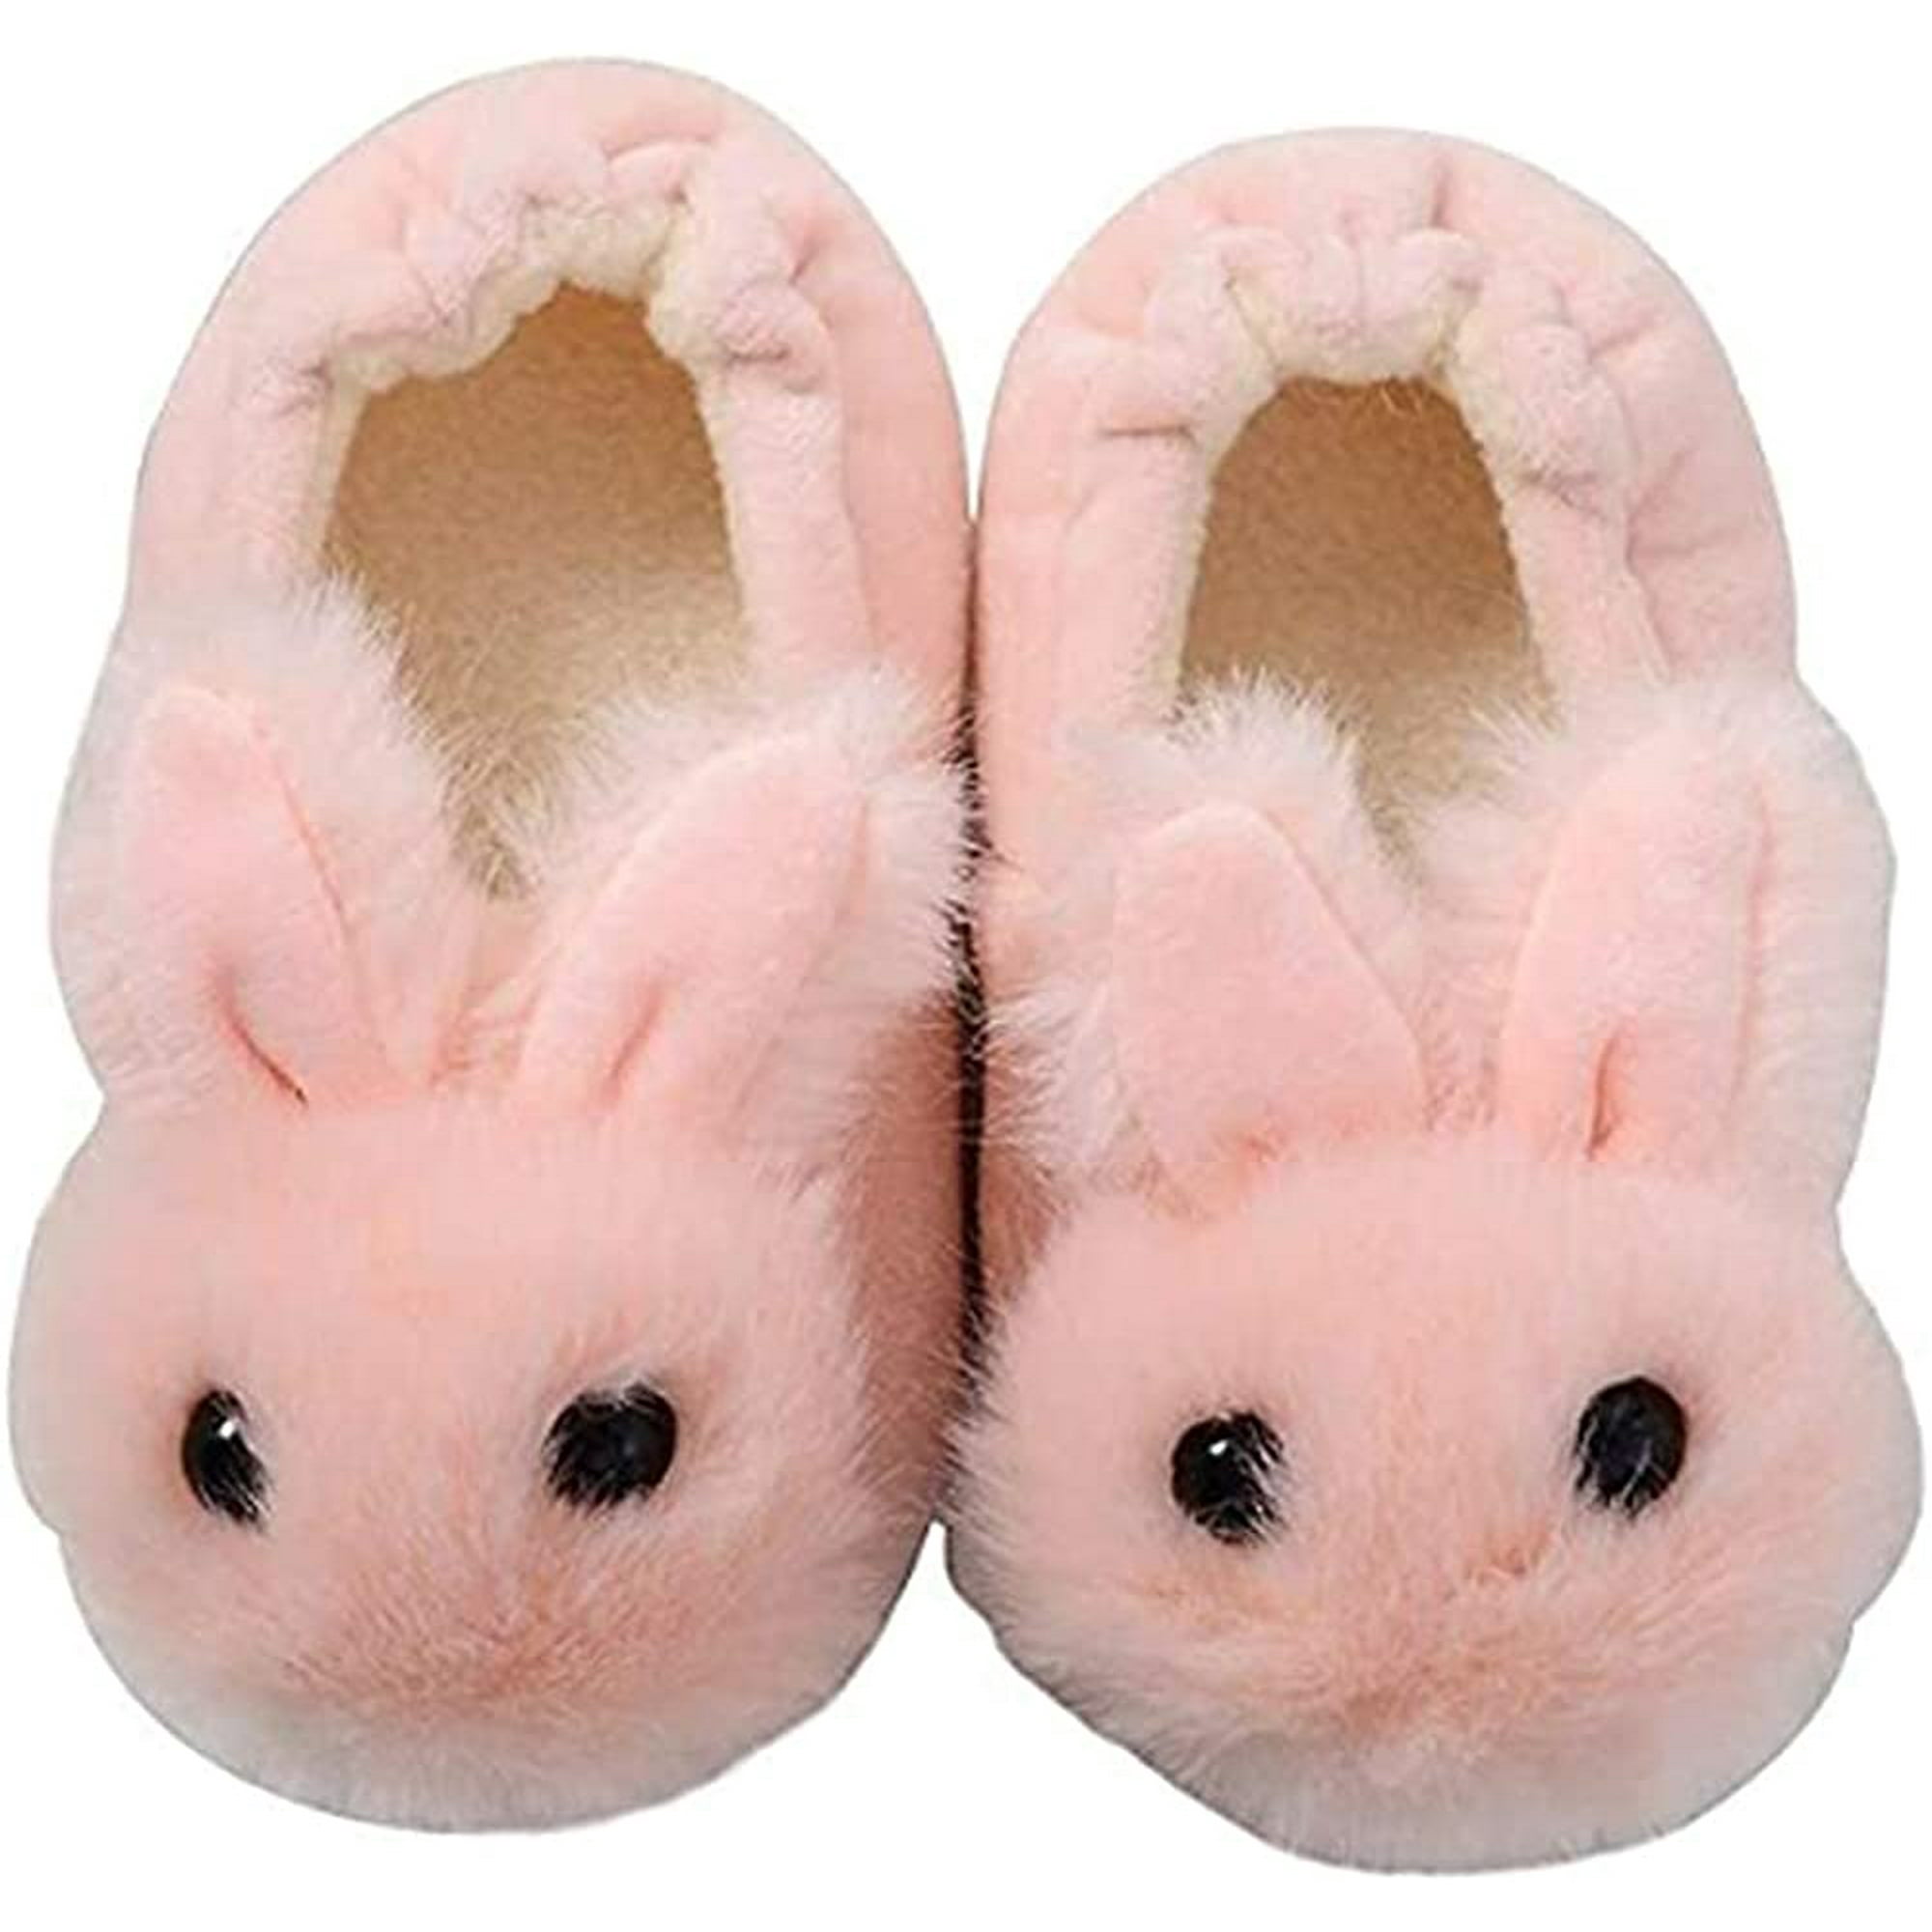 Bunny Slippers for Kids Girl Fluffy Rabbit Booties Slippers 3D Cartoon  Animal Plush Slippers Comfort Warm Footwear Shoes | Walmart Canada